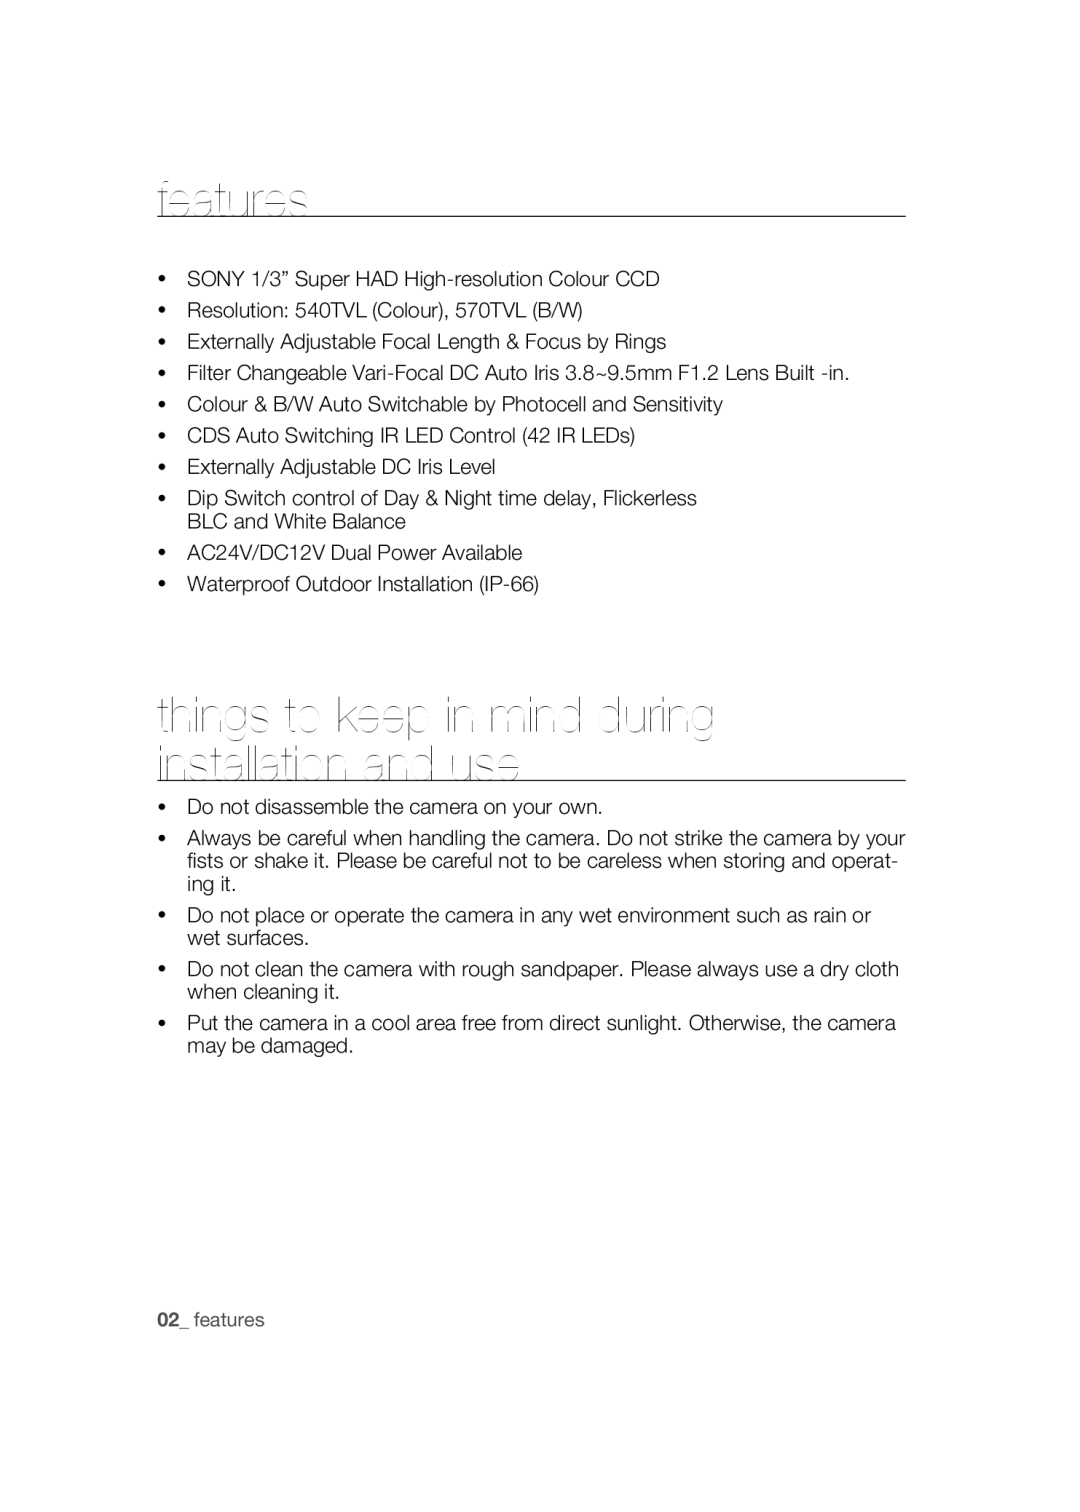 Samsung SCC-B9372P manual features, things to keep in mind during installation and use 